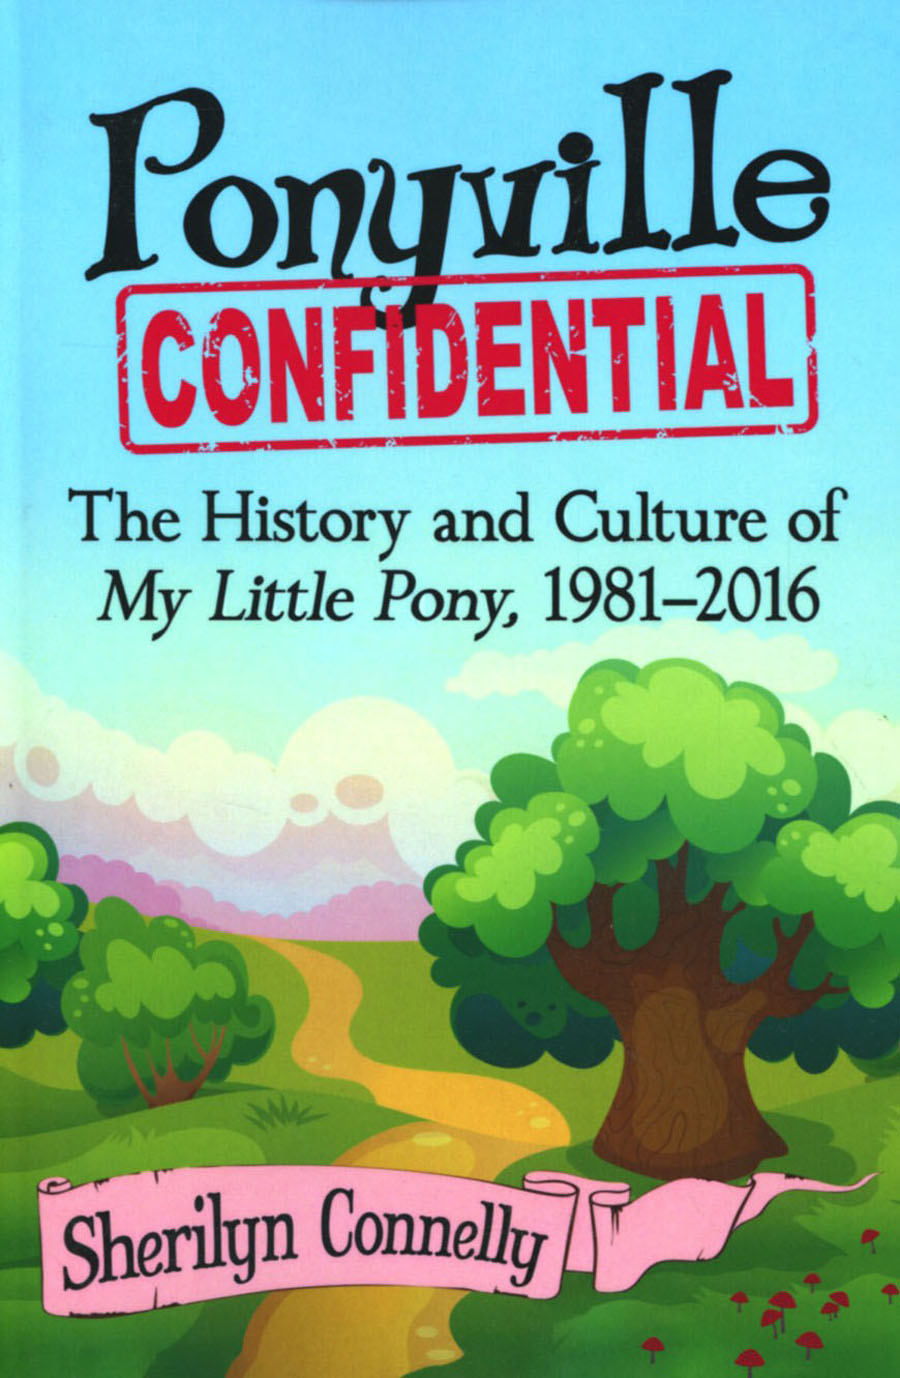 Ponyville Confidential History And Culture Of My Little Pony 1981-2016 SC